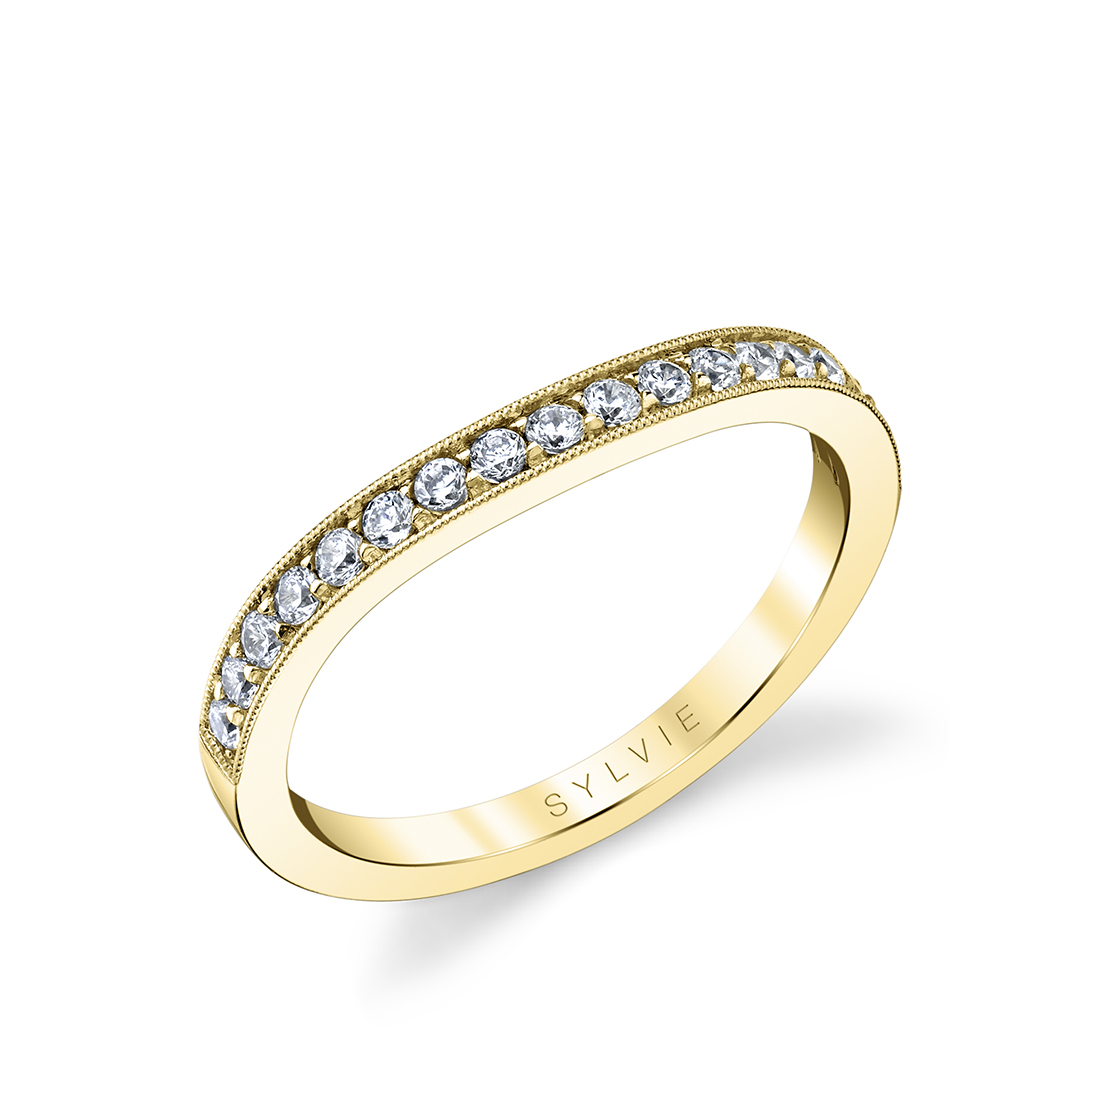 channel set wedding band with milgrain detail in yellow gold